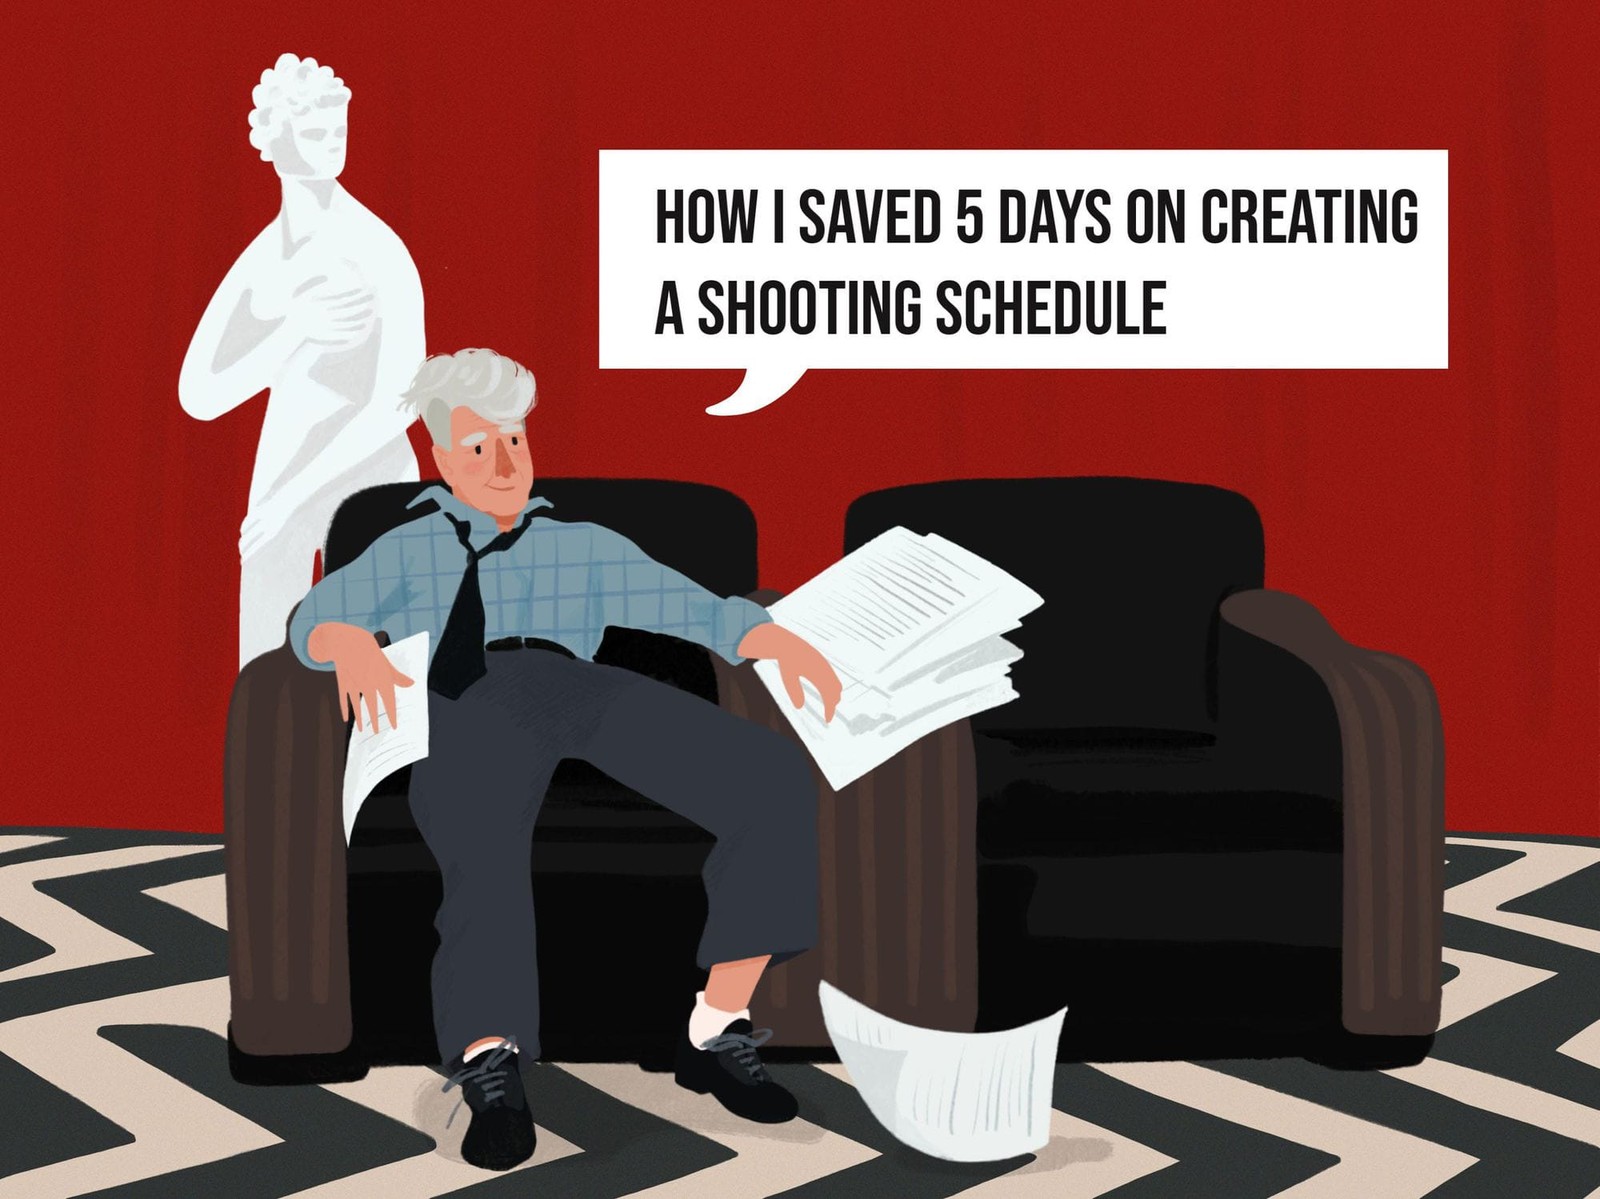 How I saved 5 days on creating a shooting schedule